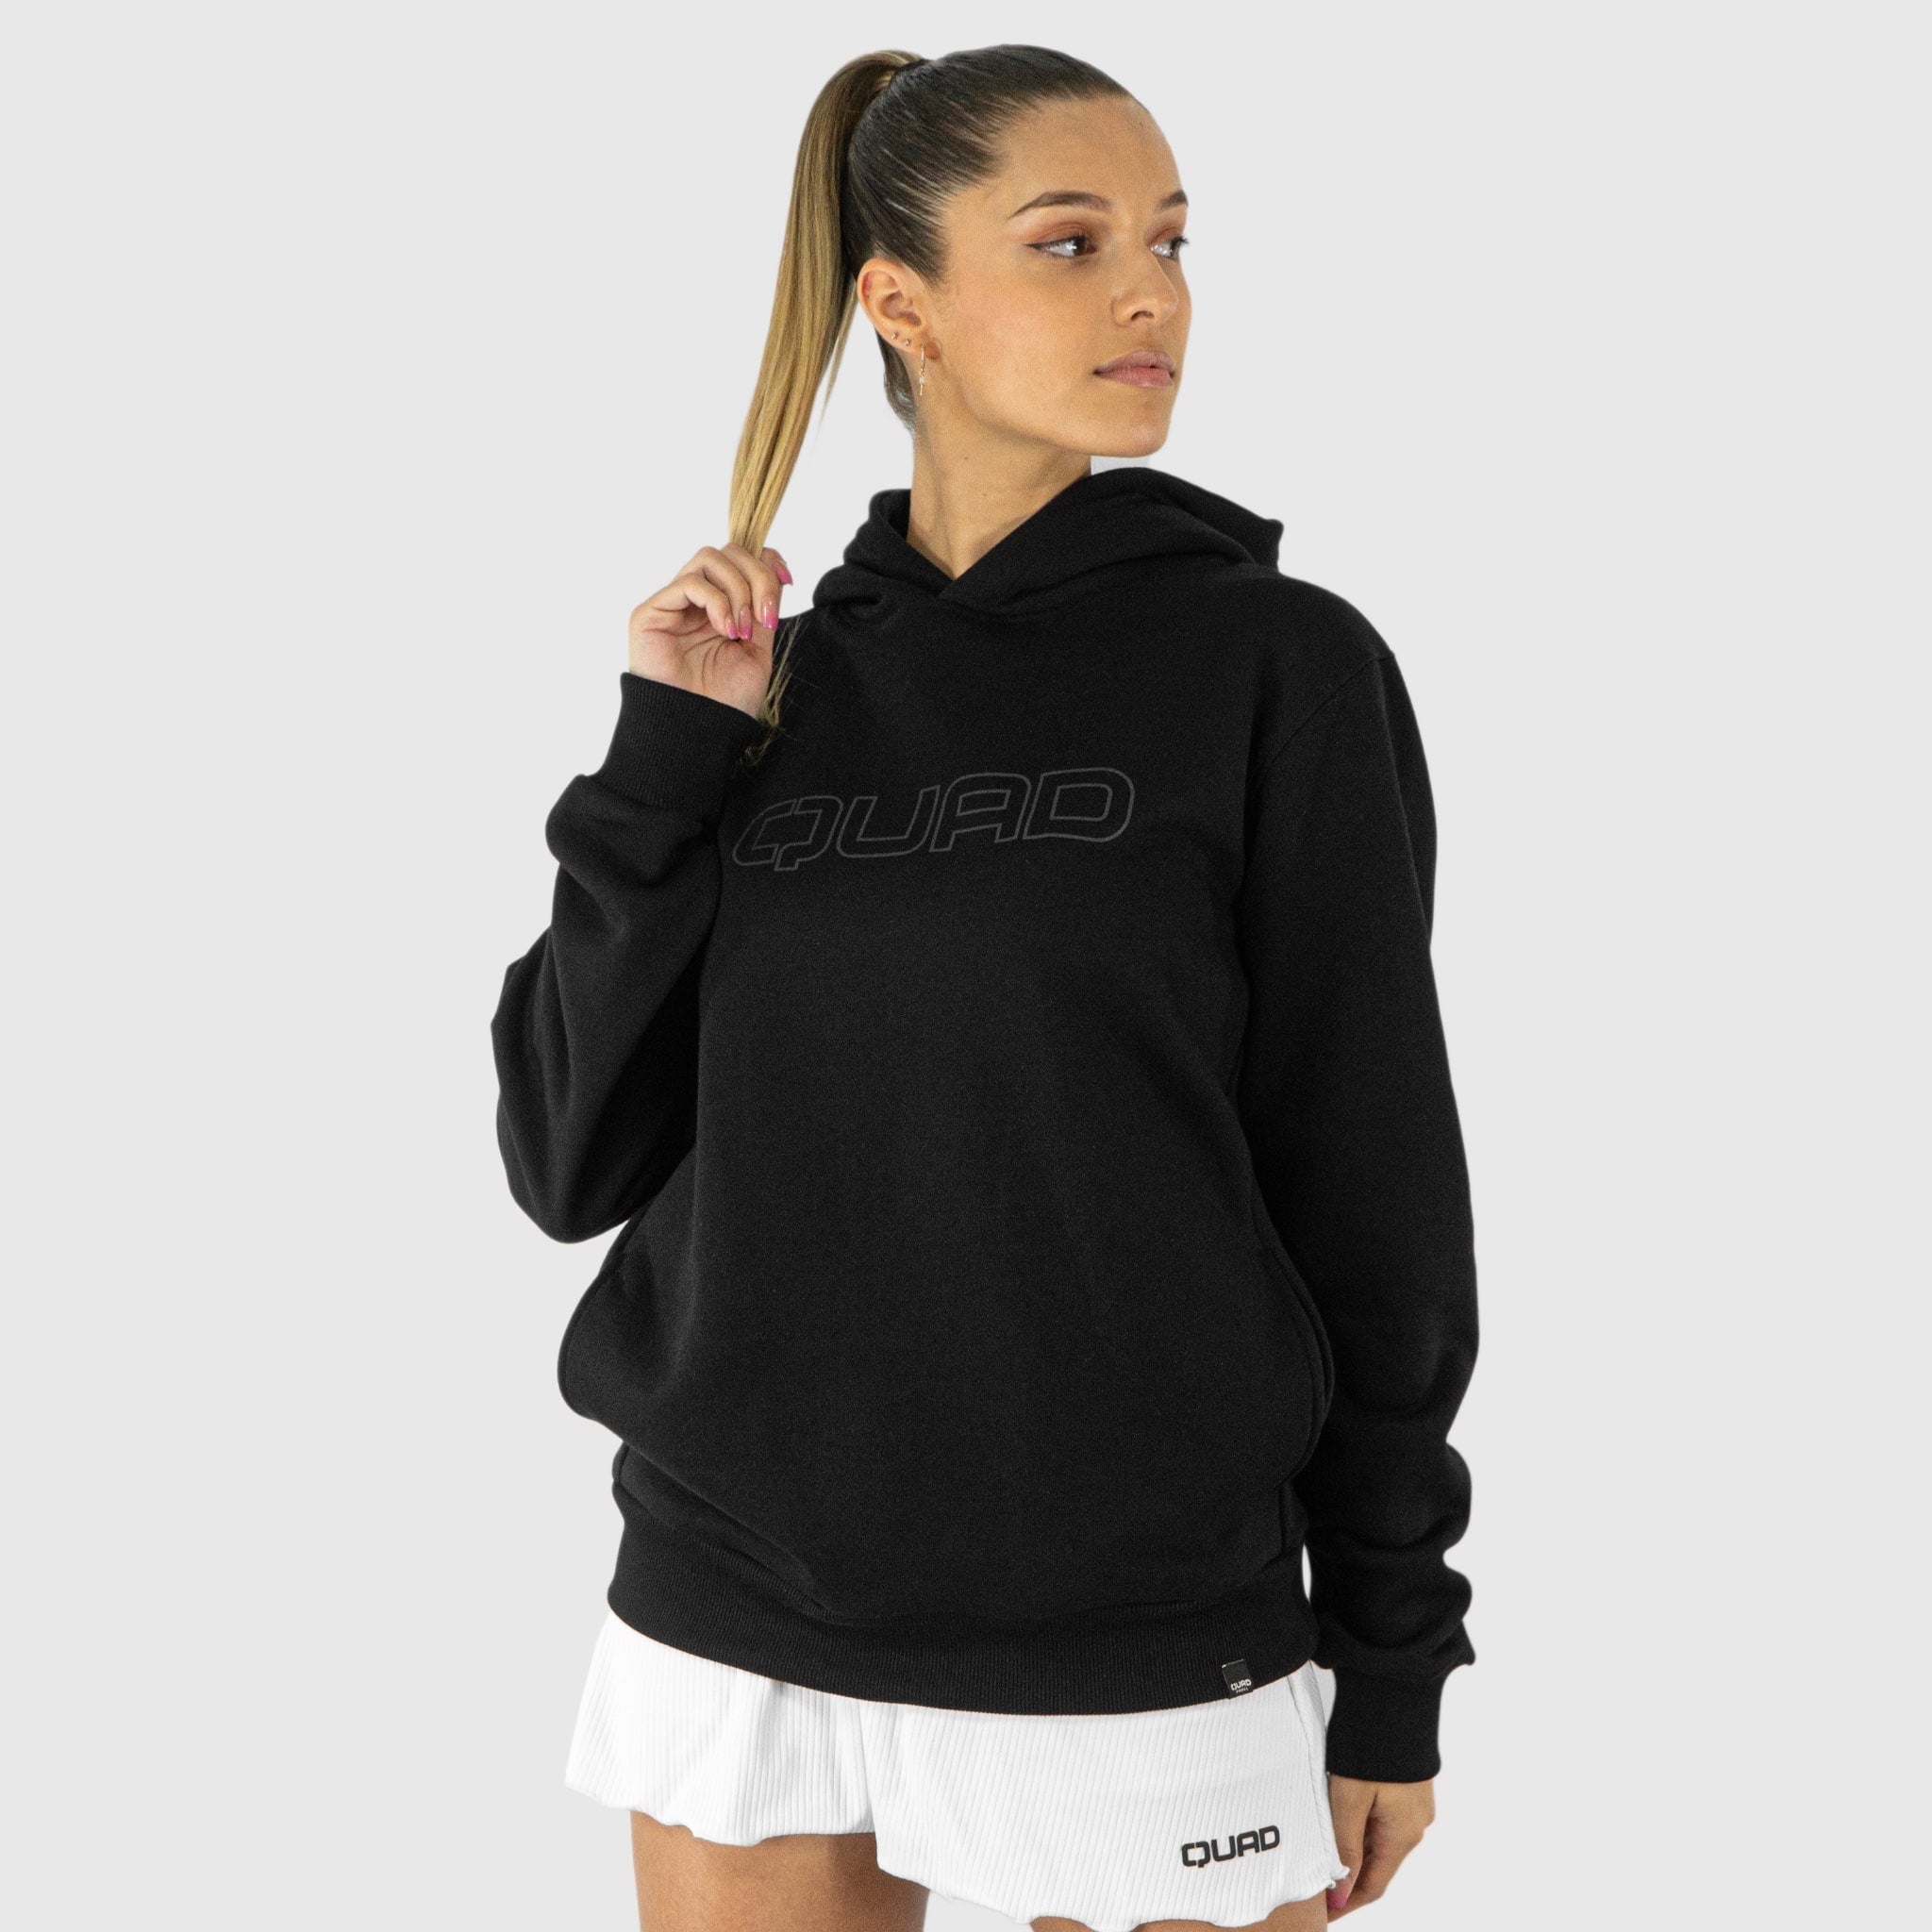 Quad Padel Essential hoodie woman front view